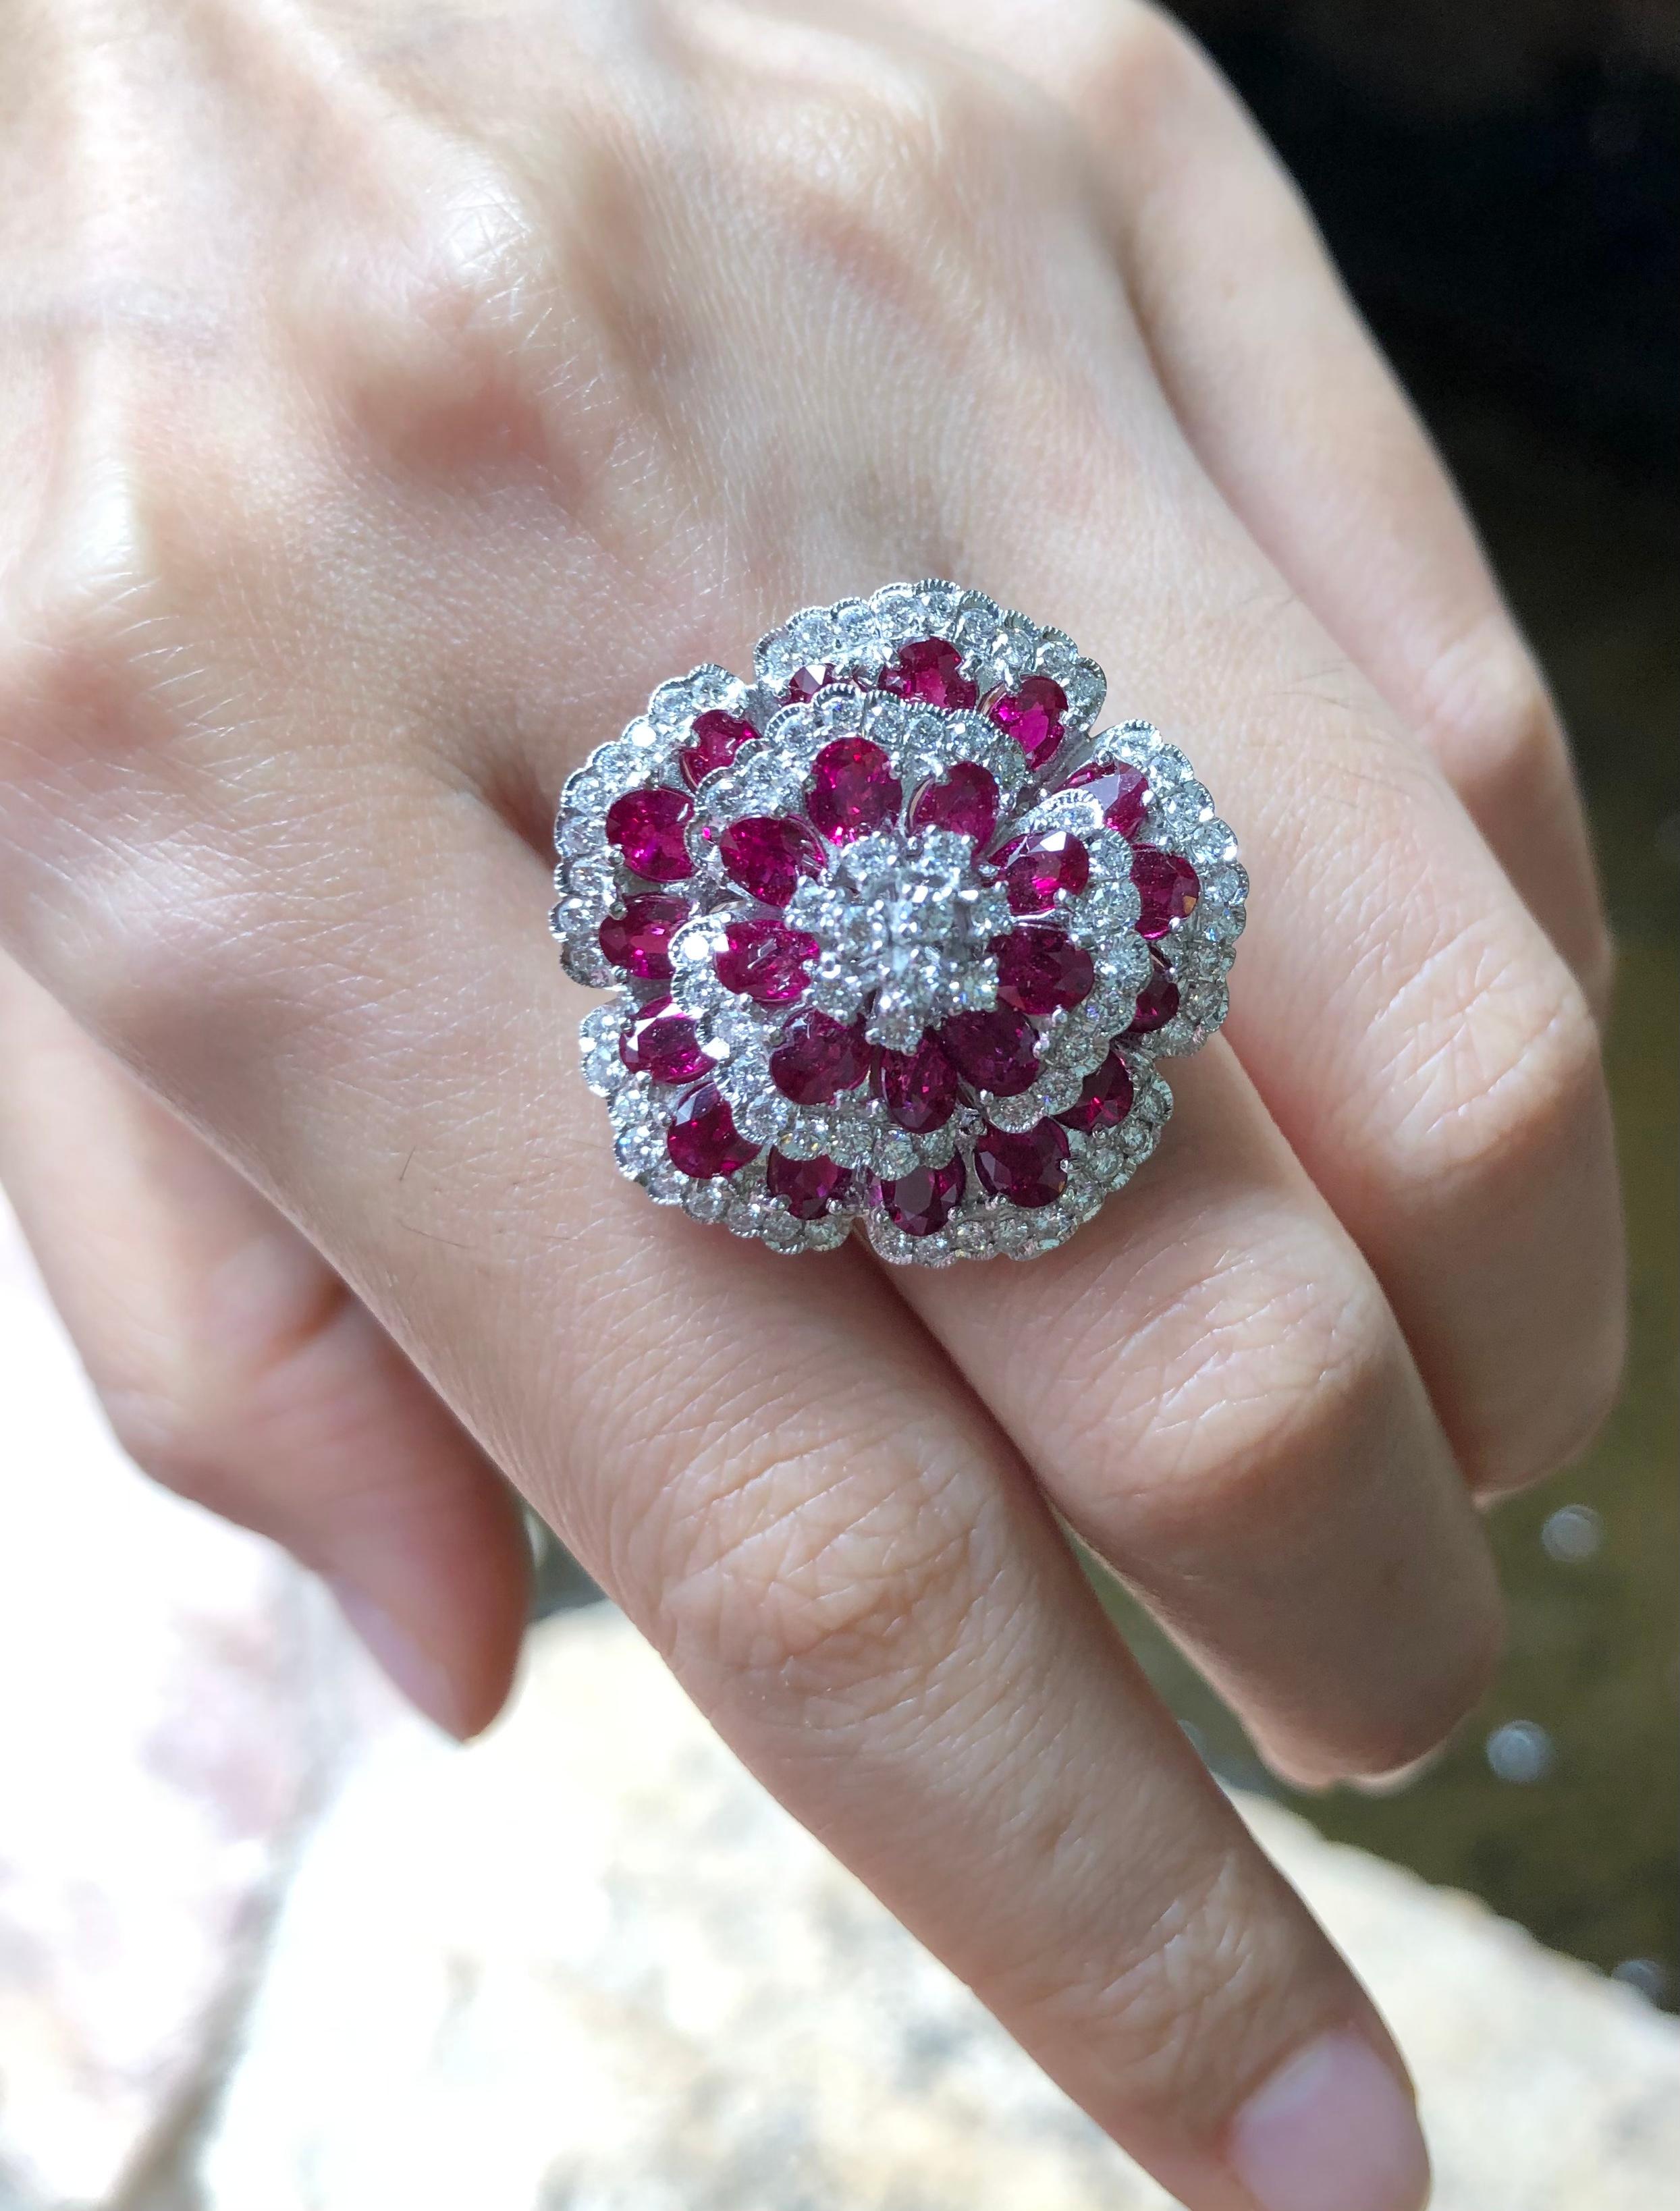 Ruby 5.90 carats with Diamond 0.95 carat Ring set in 8 Karat White Gold Settings

Width:  2.6 cm 
Length:  2.6 cm
Ring Size: 54
Total Weight: 16.91 grams

